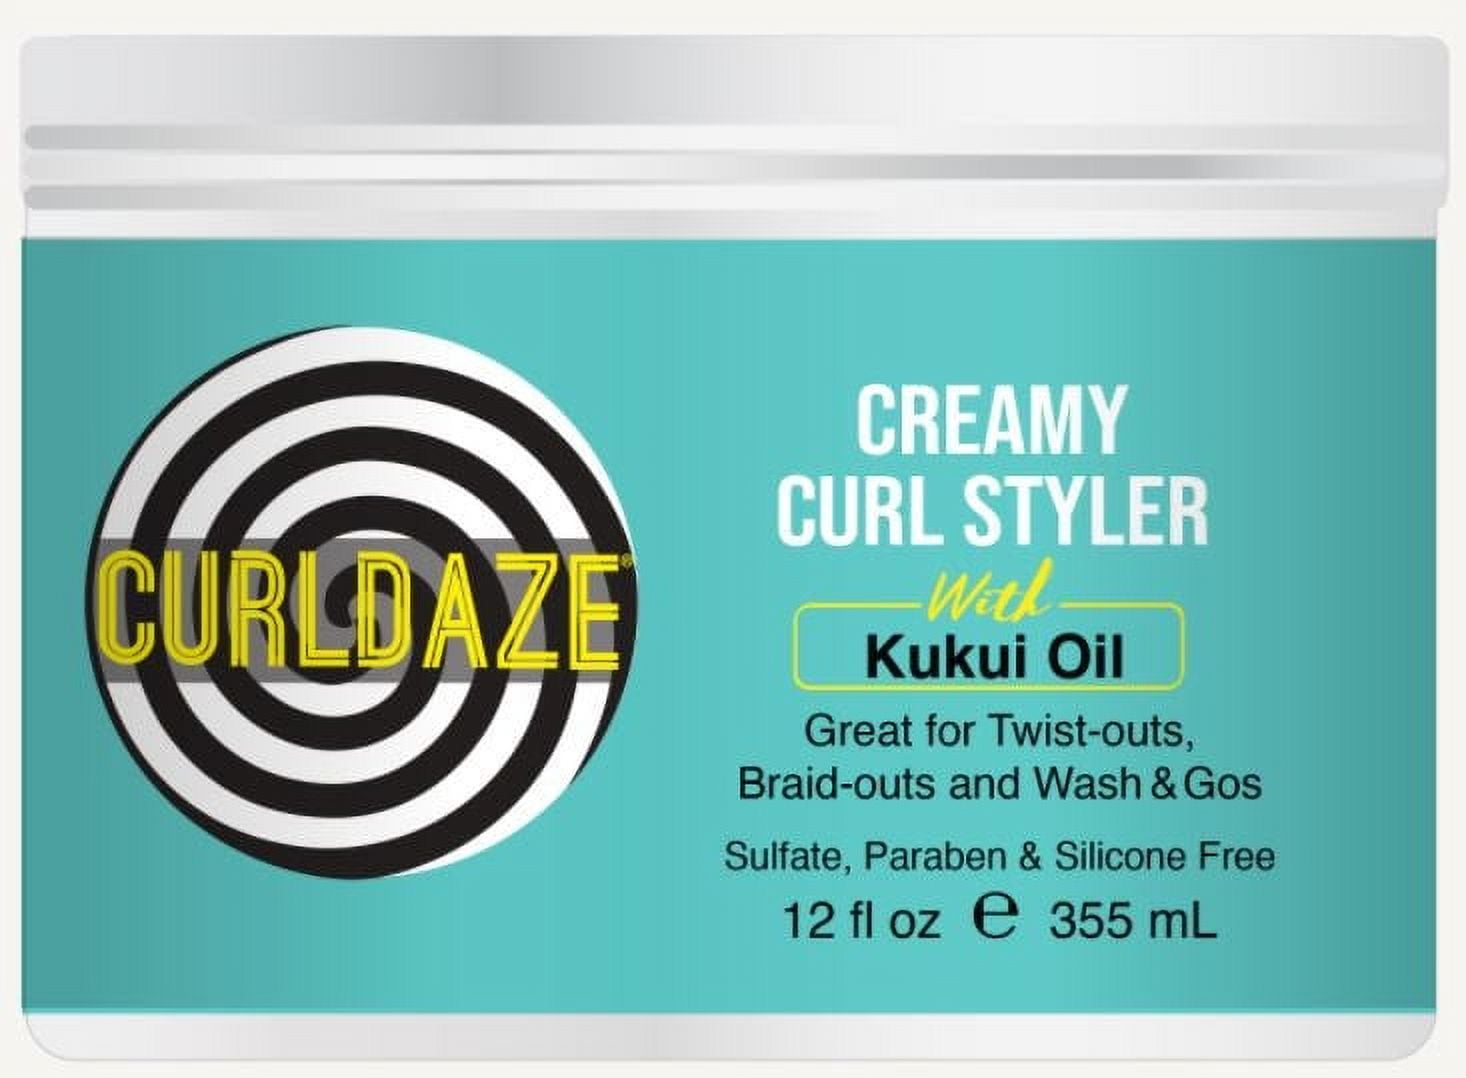 Curldaze Creamy Curl Styler with Kukui Oil 12 oz., All Hair Type